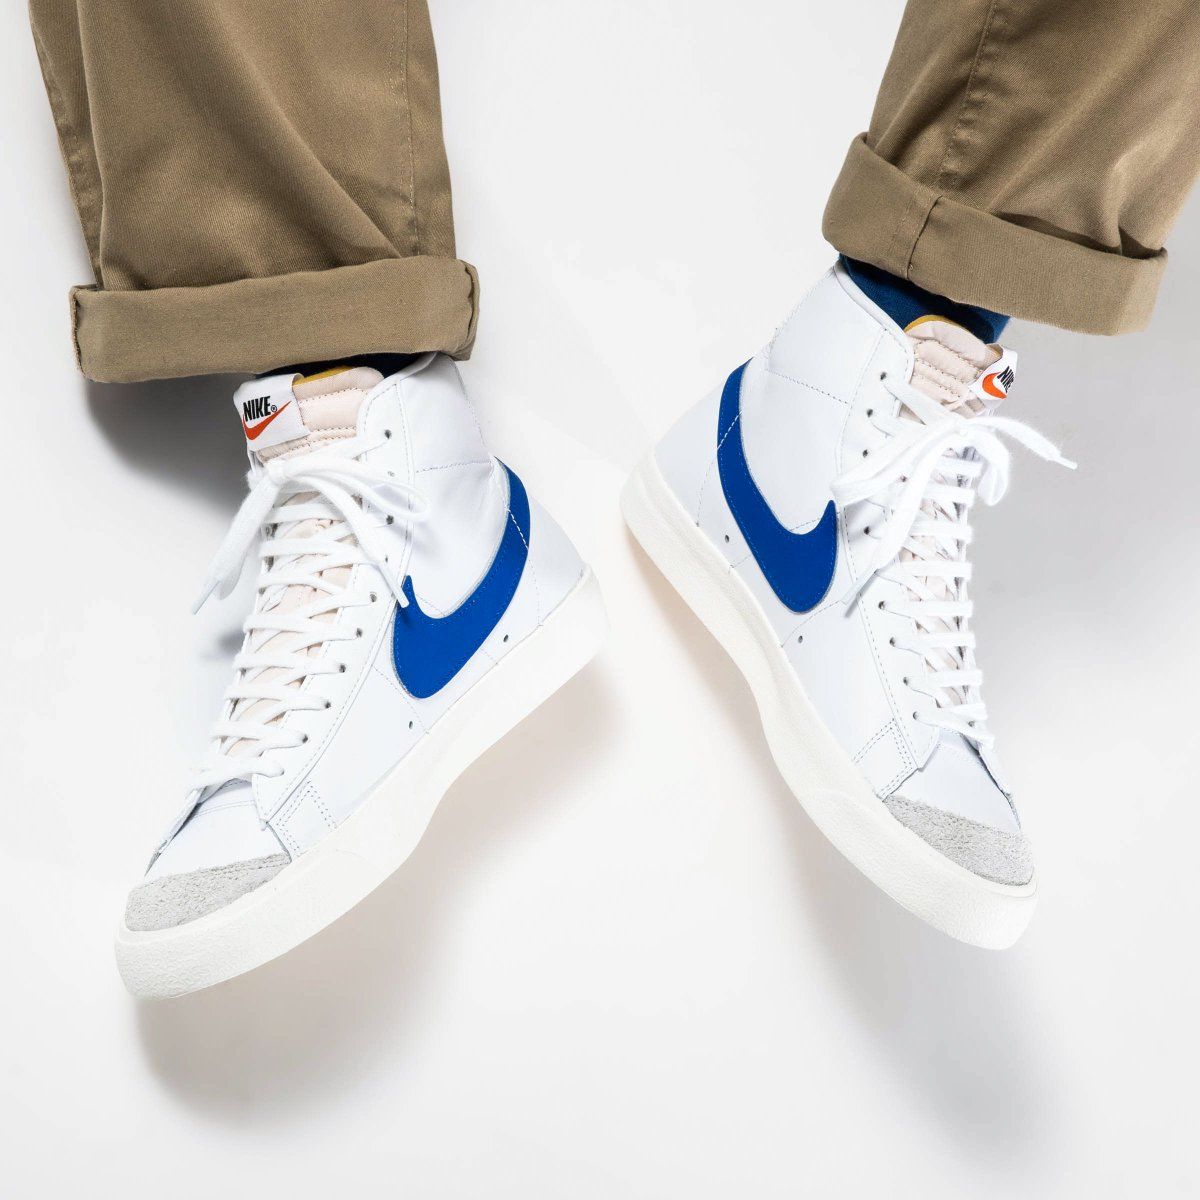 The best retro sneakers to add to your collection | Lifestyle Asia Bangkok